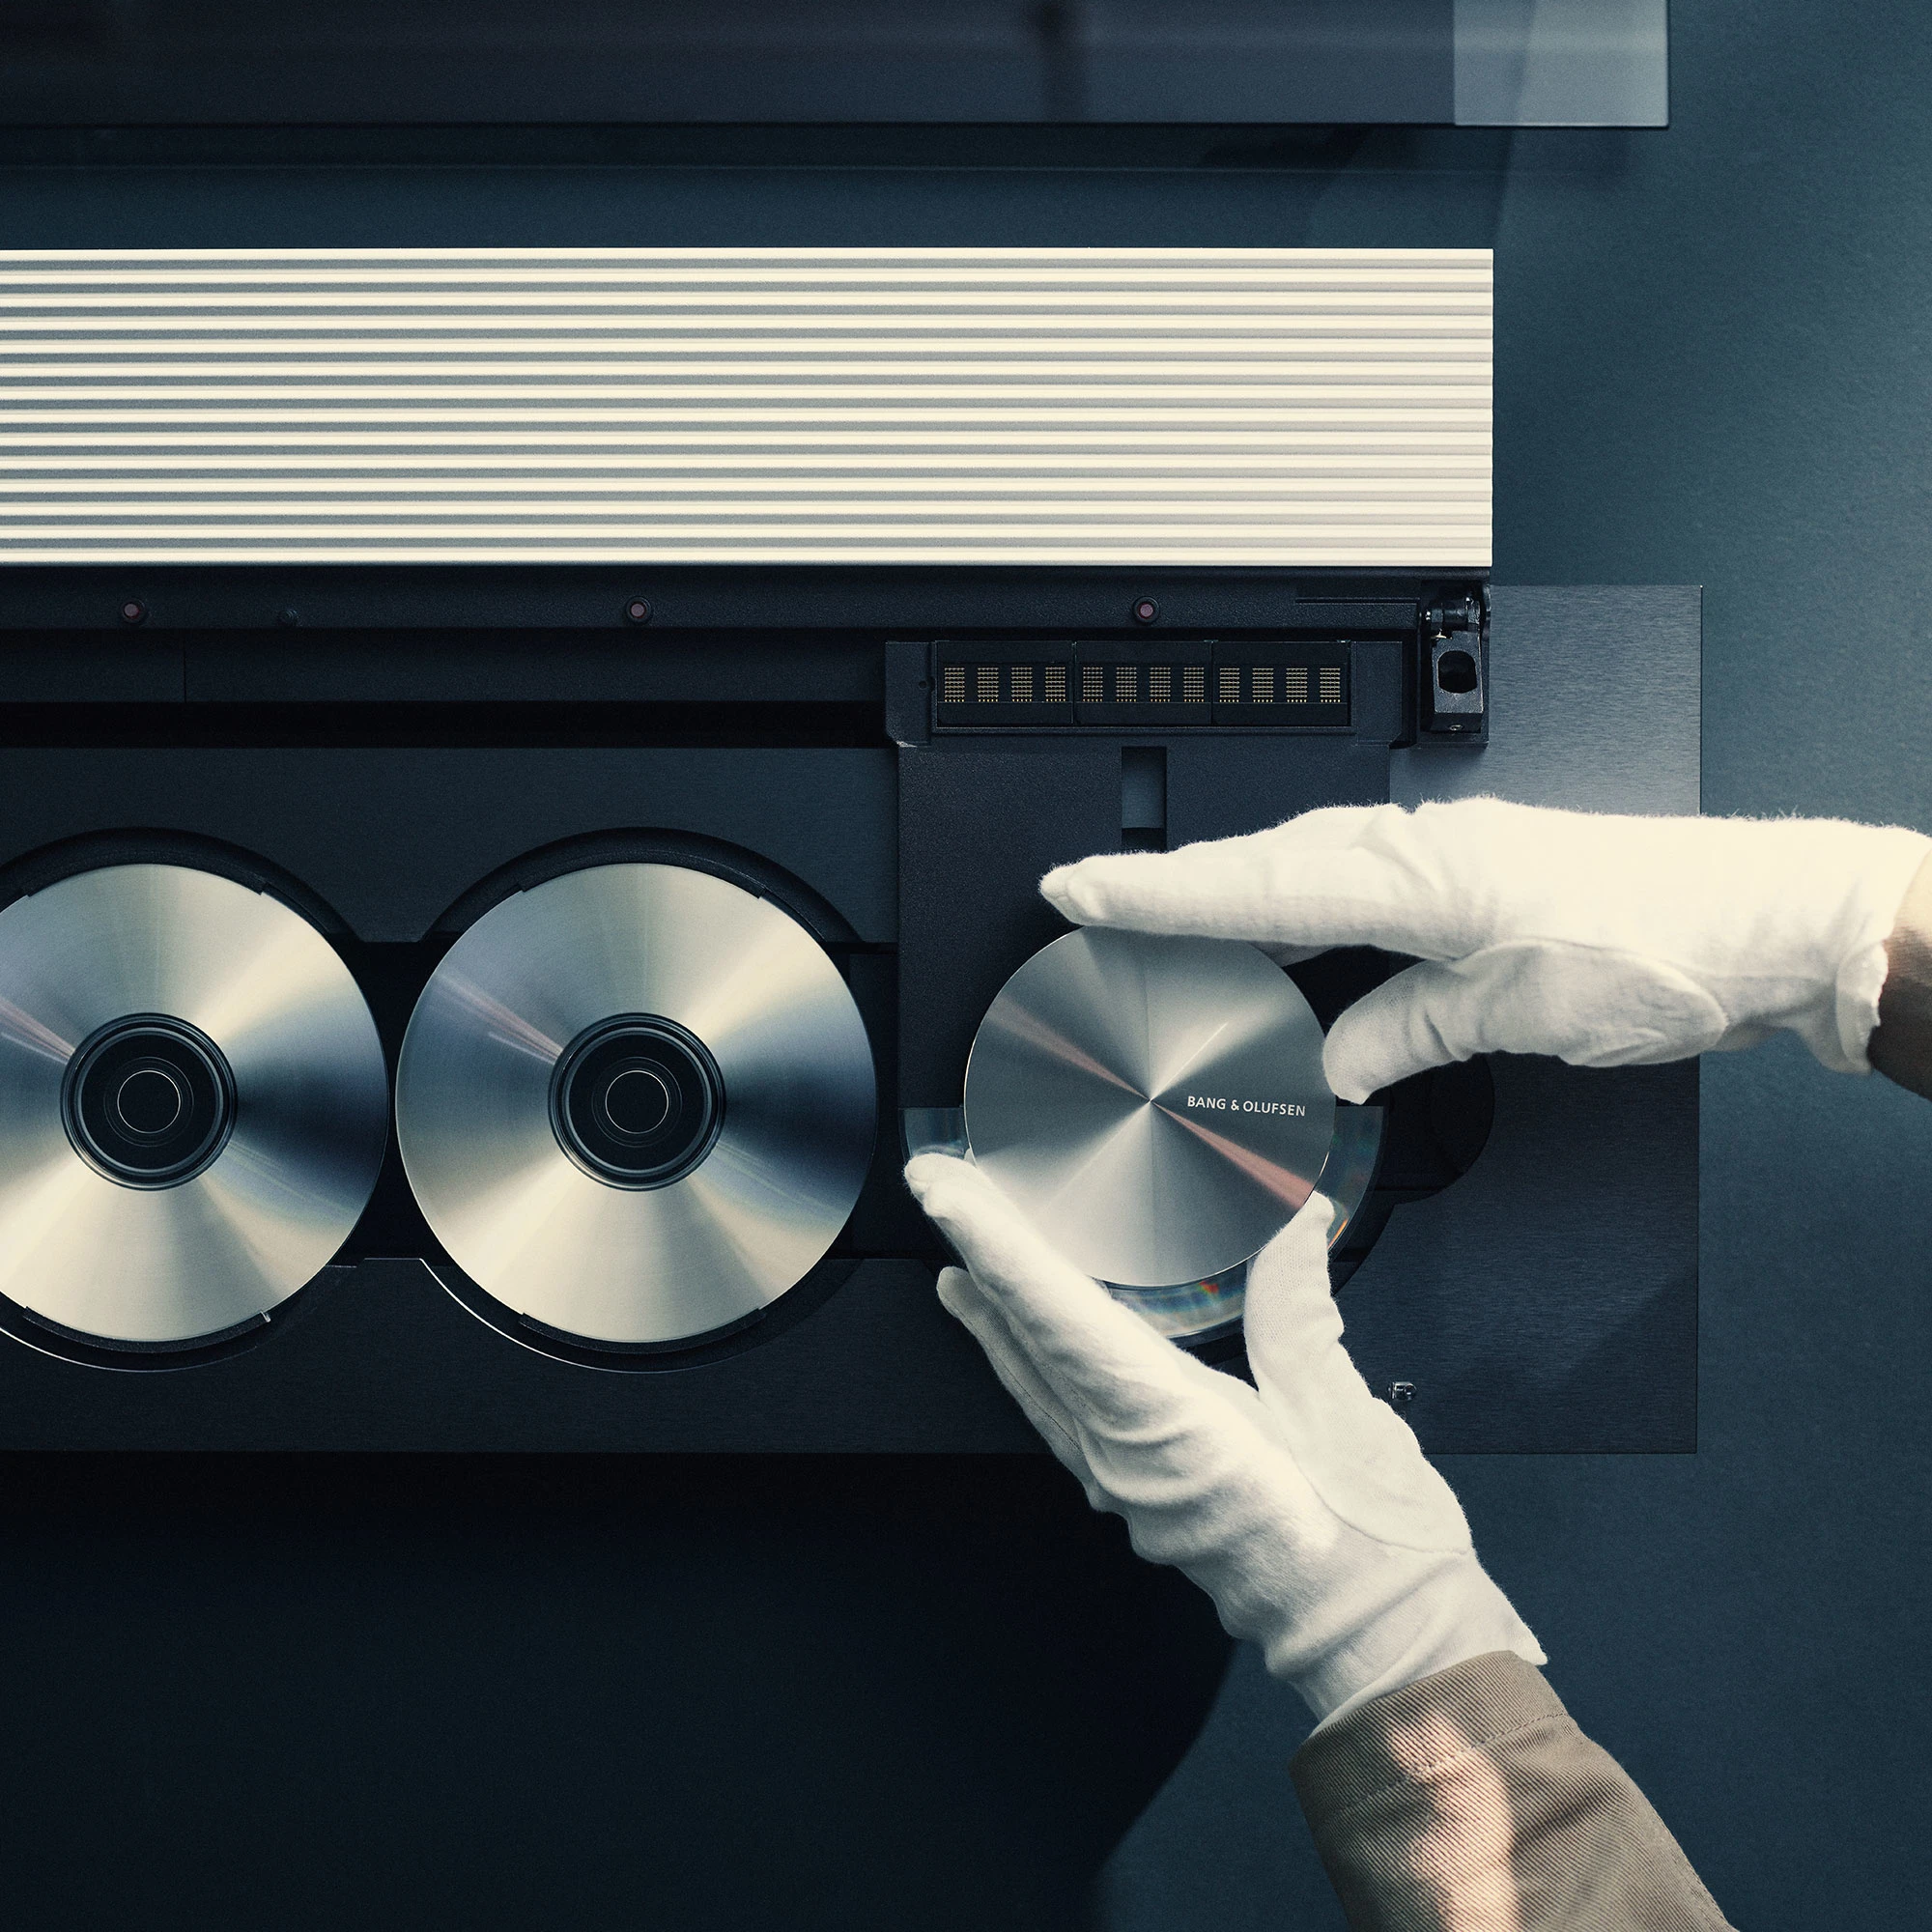 Detail image of a pair of hands in white gloves adjusting a Beosound 9000 CD player recreated as the Beosystem 9000c in Factory 3, Struer